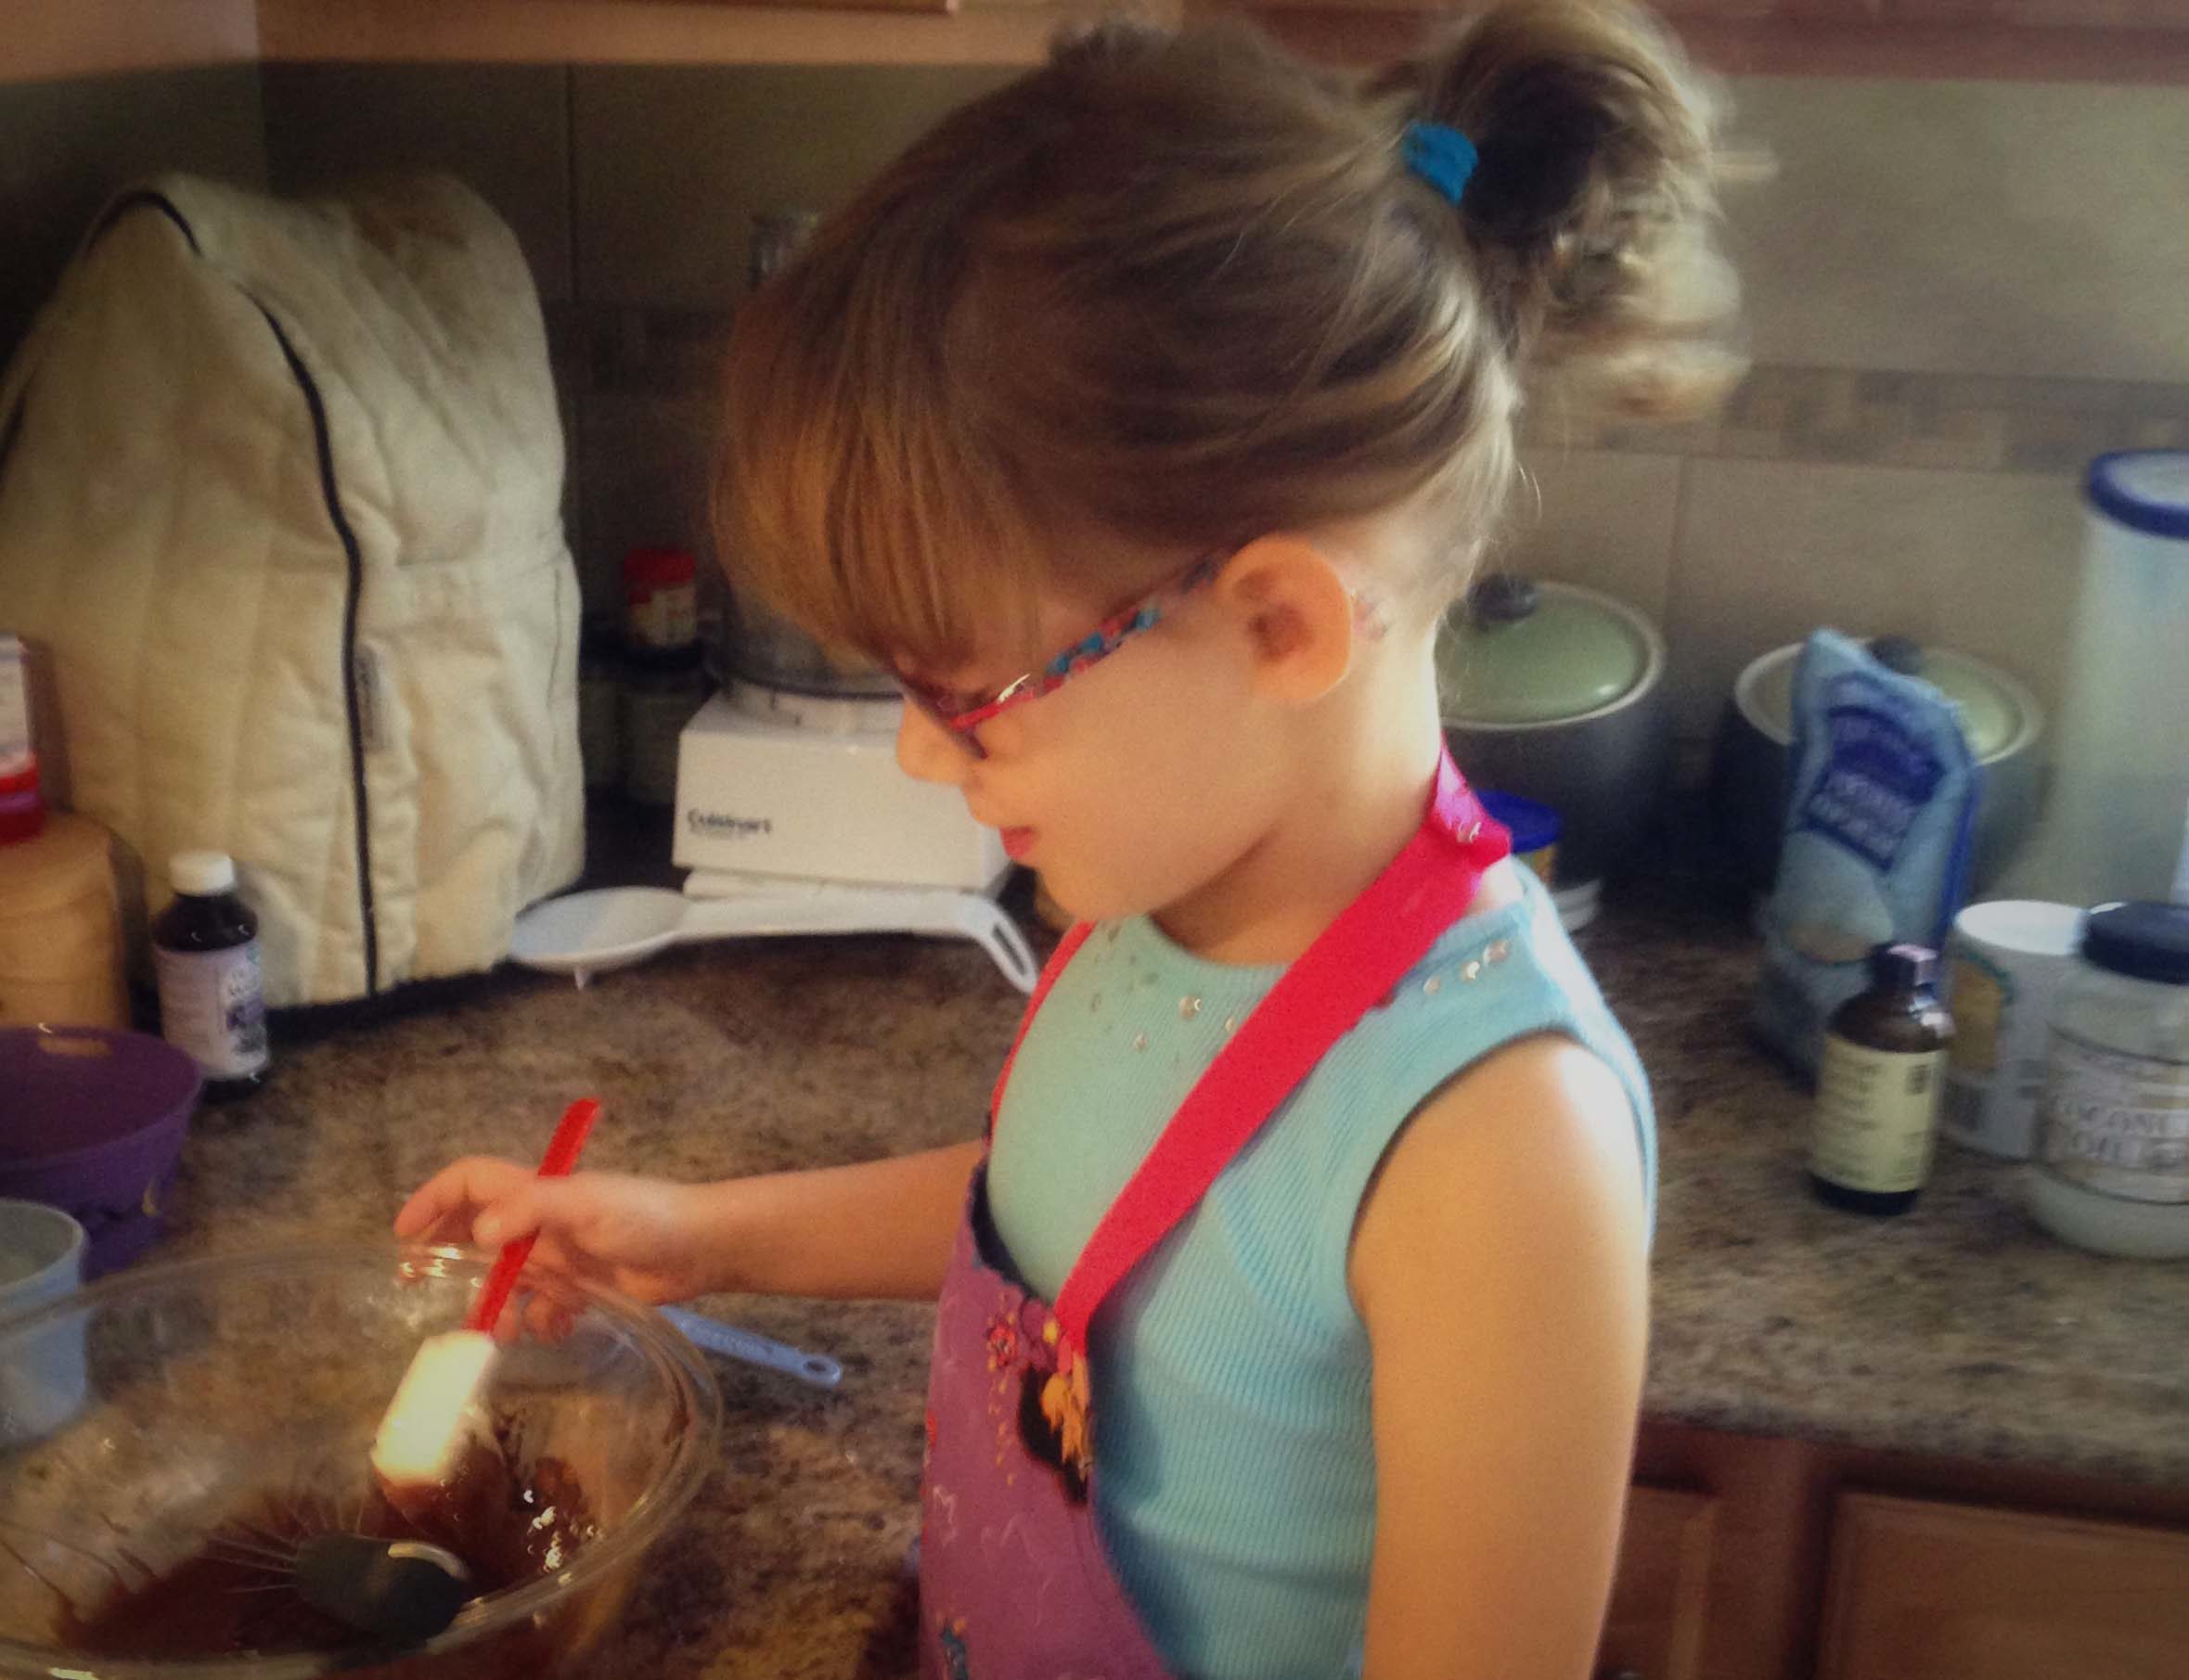 Why I Let My 5-Year-Old Destroy My Kitchen